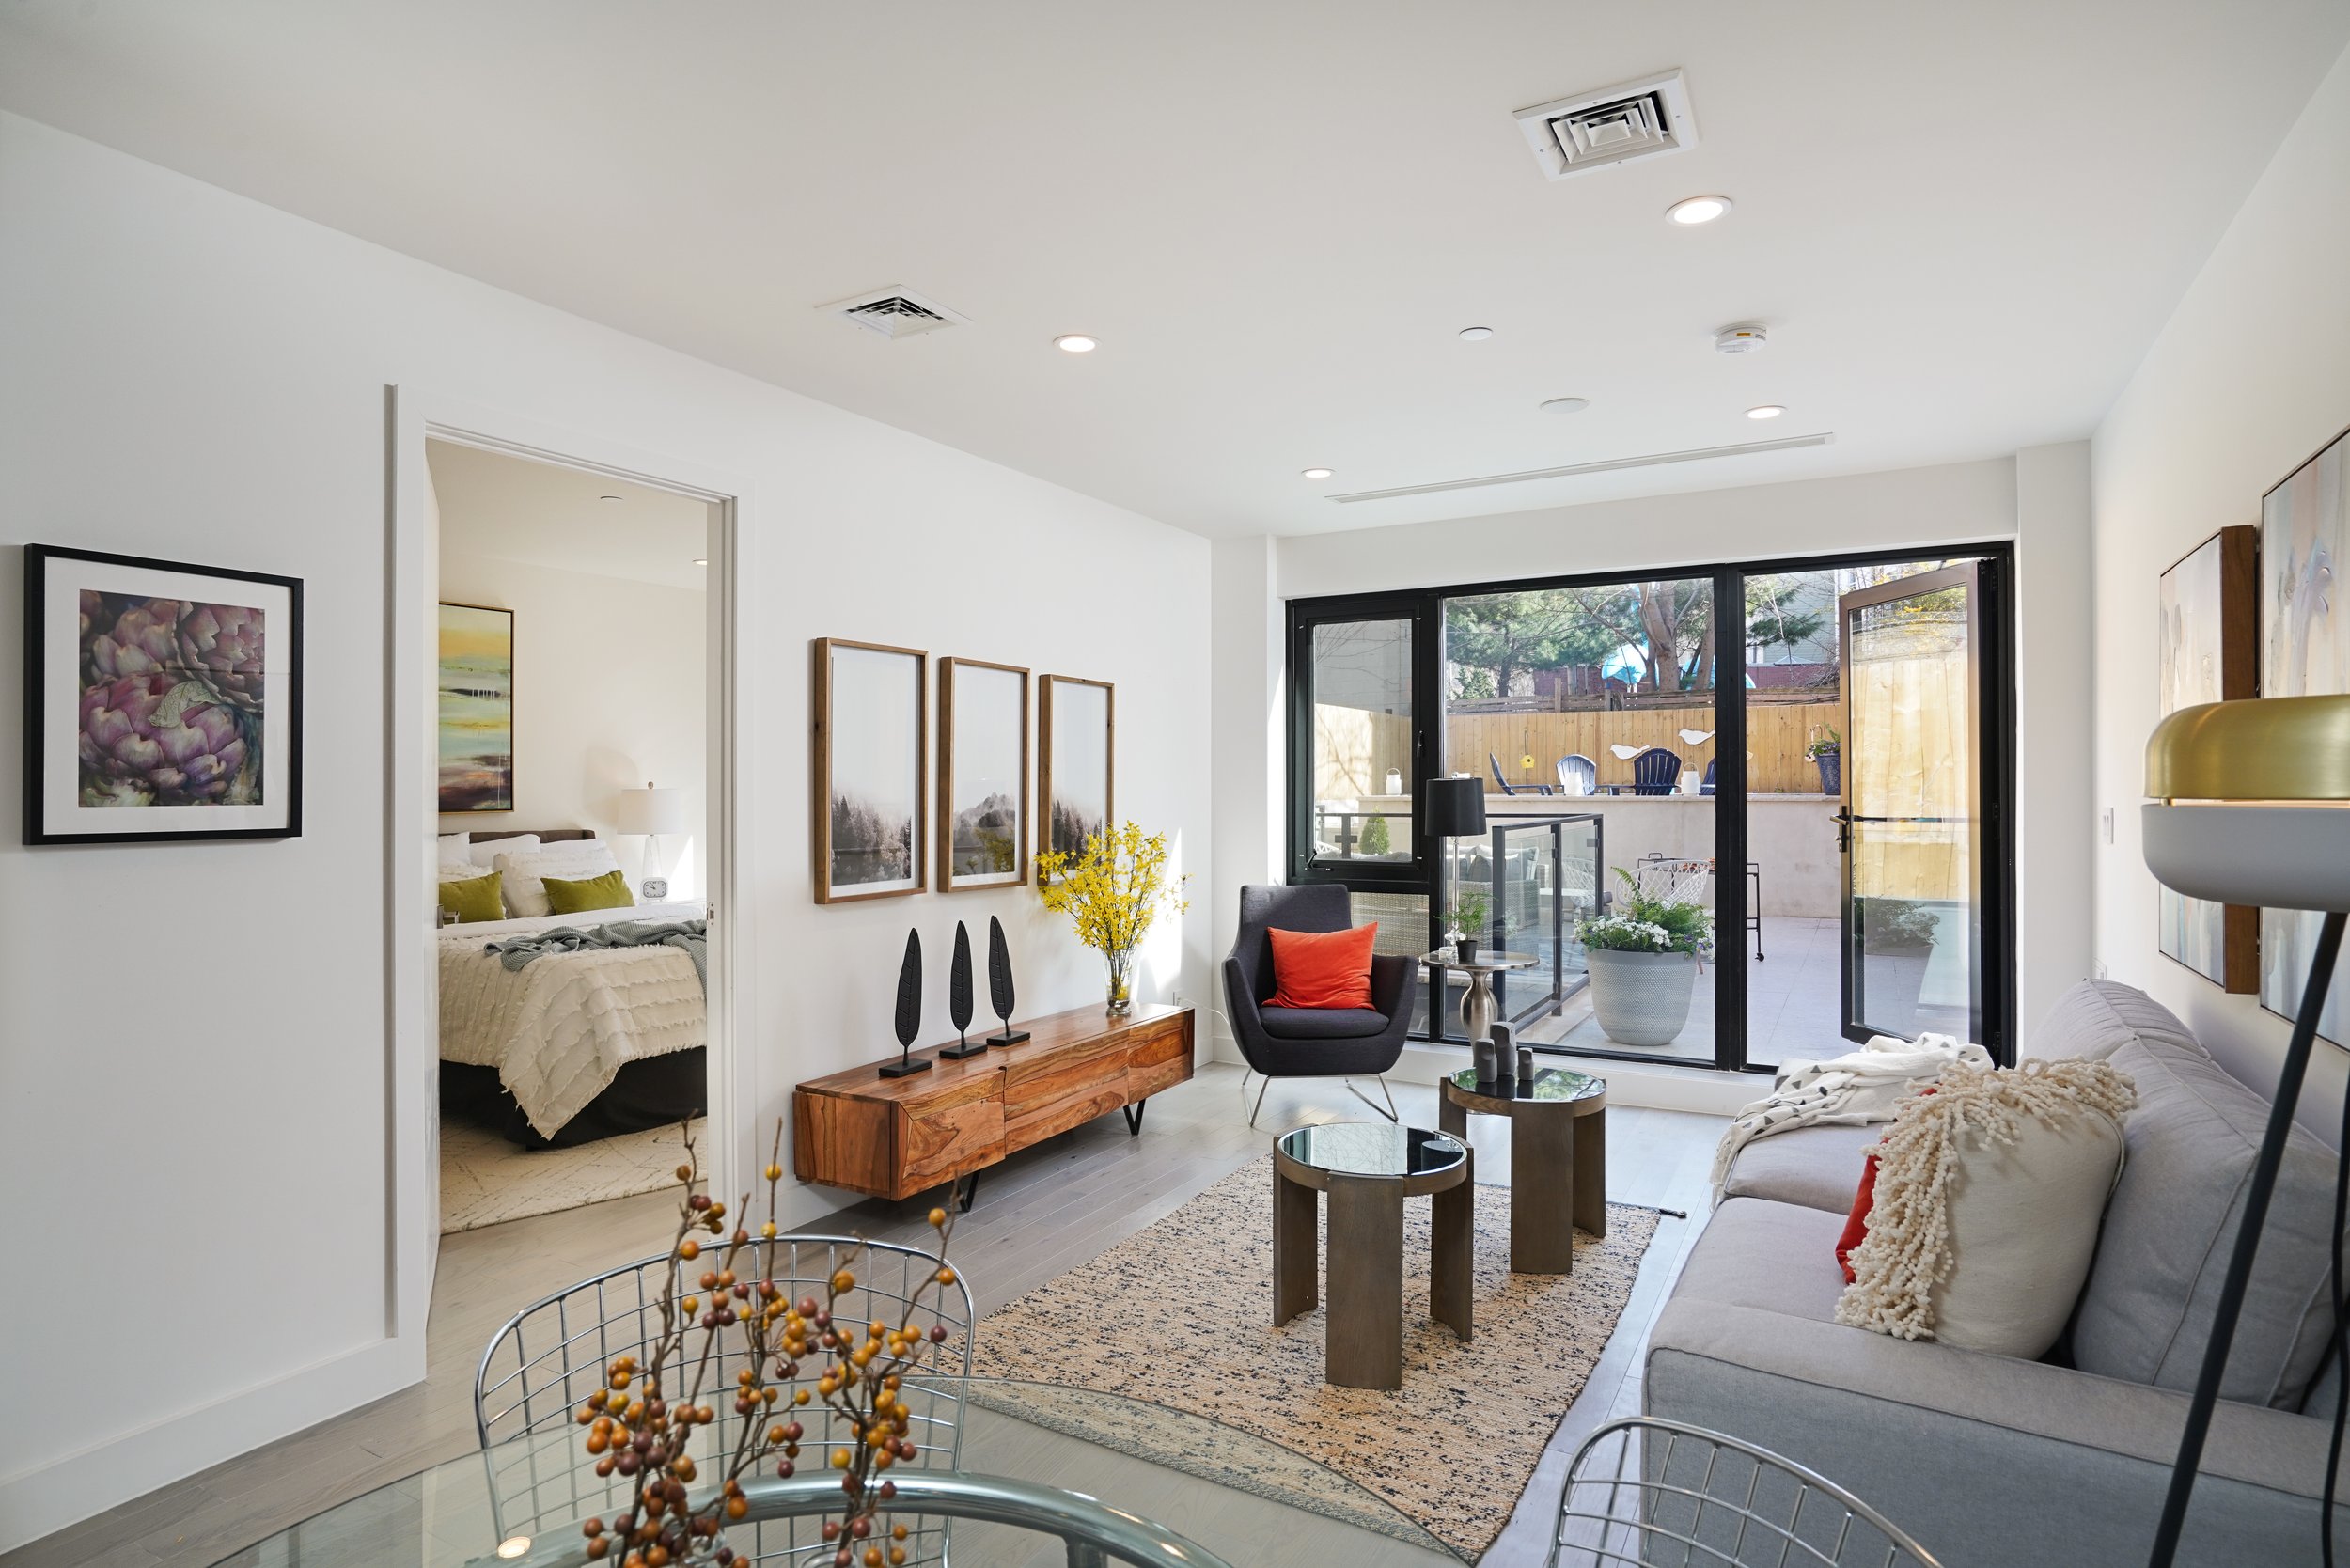  Situated in the heart of Brooklyn’s creative East Williamsburg neighborhood, 244 Devoe offers the rare opportunity to live just a short walk from one of the borough’s most popular areas and thoroughfares, Williamsburg and its pulsing Bedford Avenue,